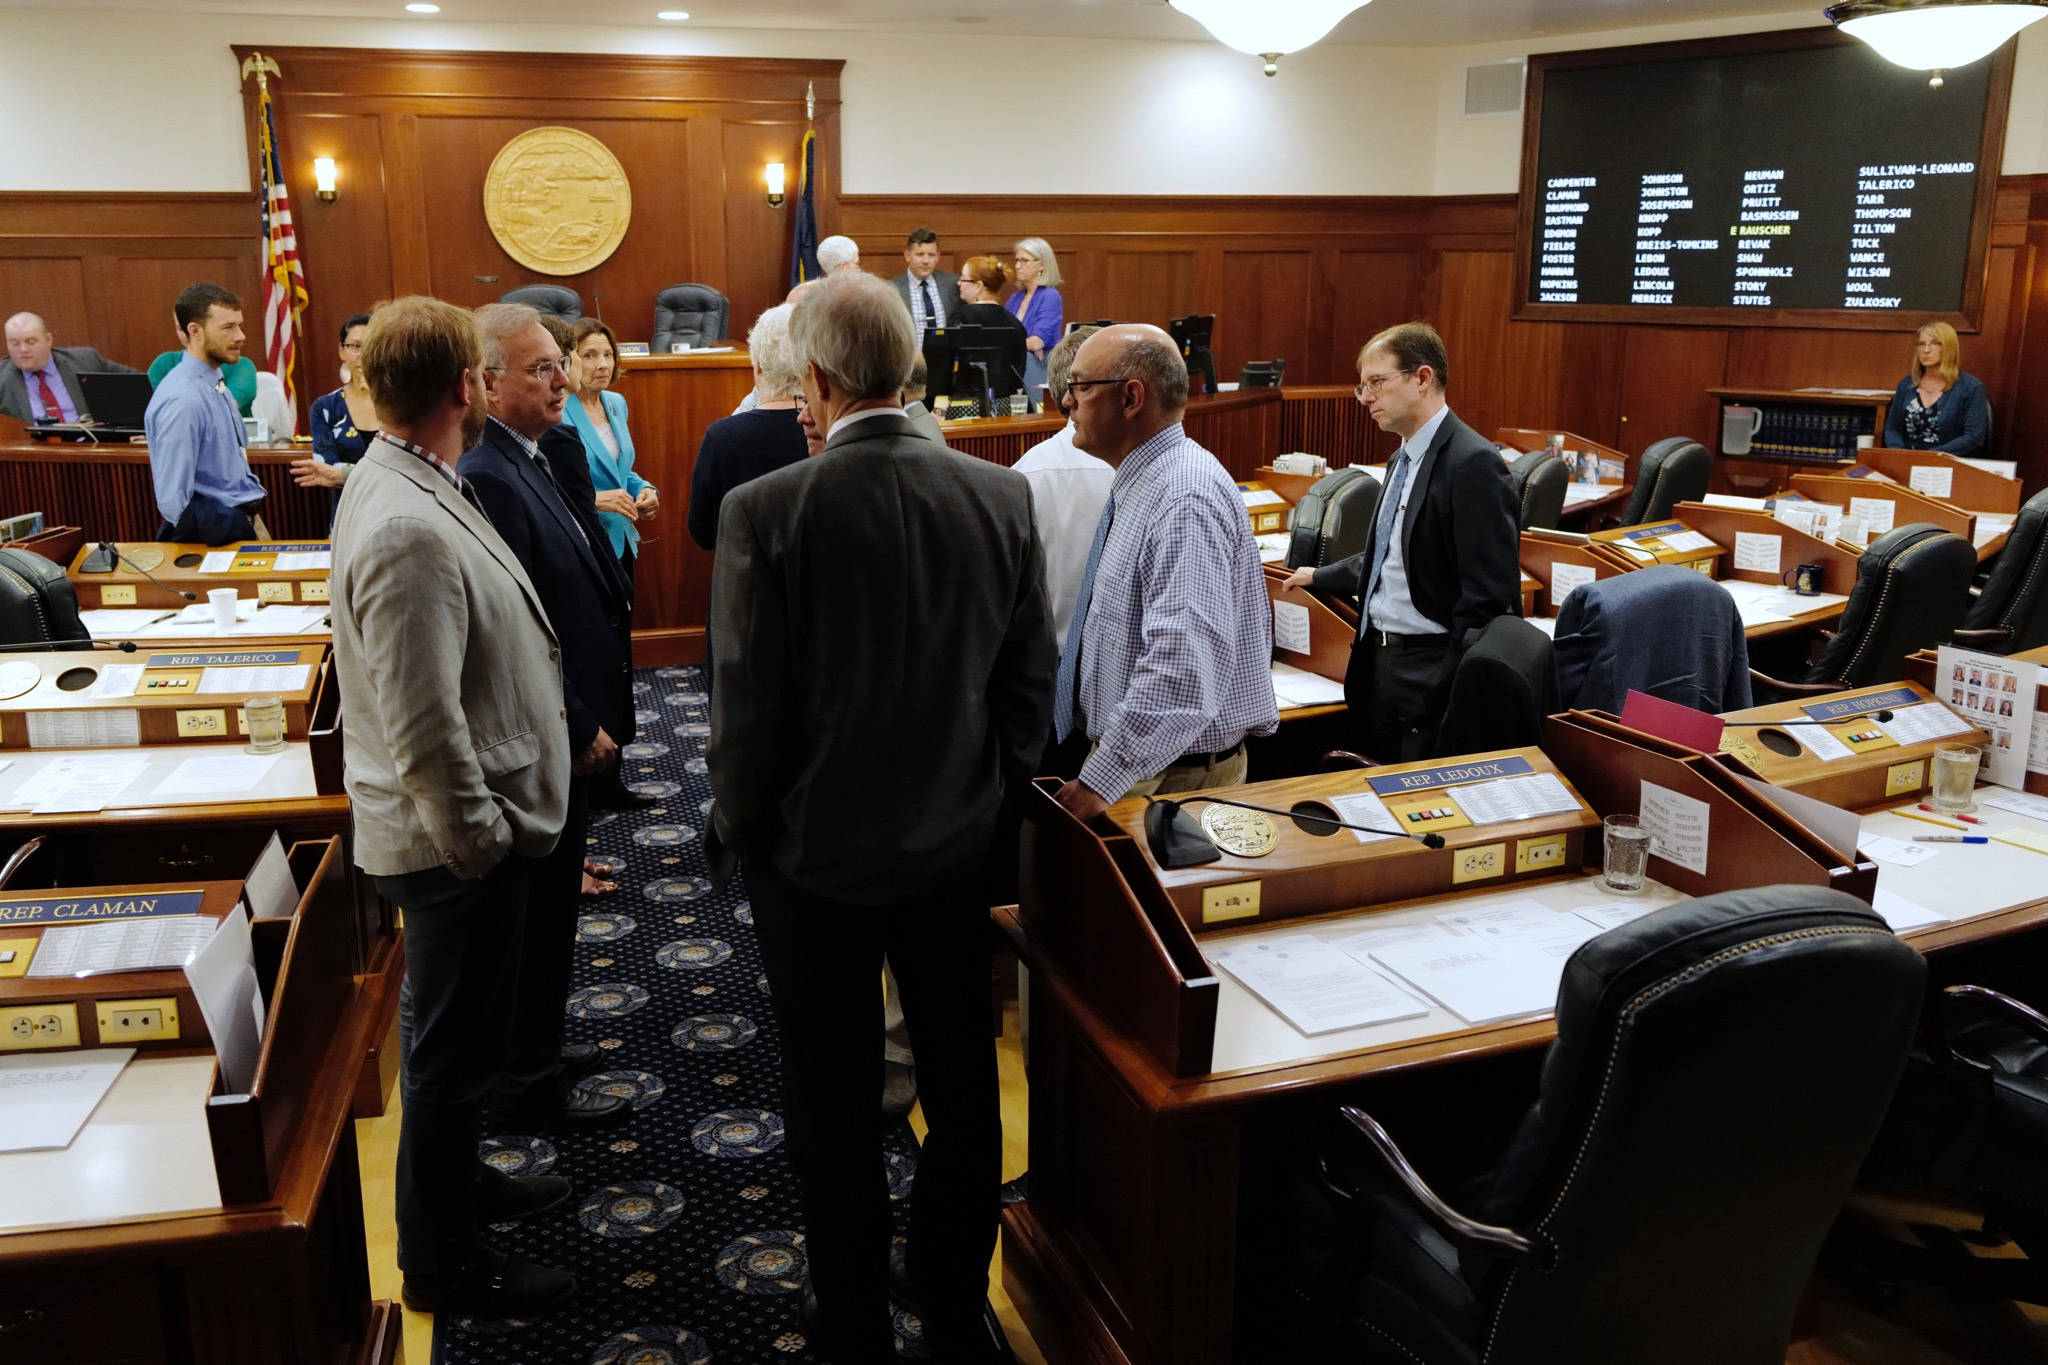 Lawmakers talk among themselves during a break of a joint session of the Alaska Legislature Thursday, July 11, 2019, in Juneau, Alaska. Lawmakers are meeting for a second day to consider overriding Gov. Mike Dunleavy’s budget vetoes, but still don’t have the needed 45 votes as about a third of lawmakers continue to meet in Wasilla instead of Juneau. (Michael Penn/The Juneau Empire via AP)